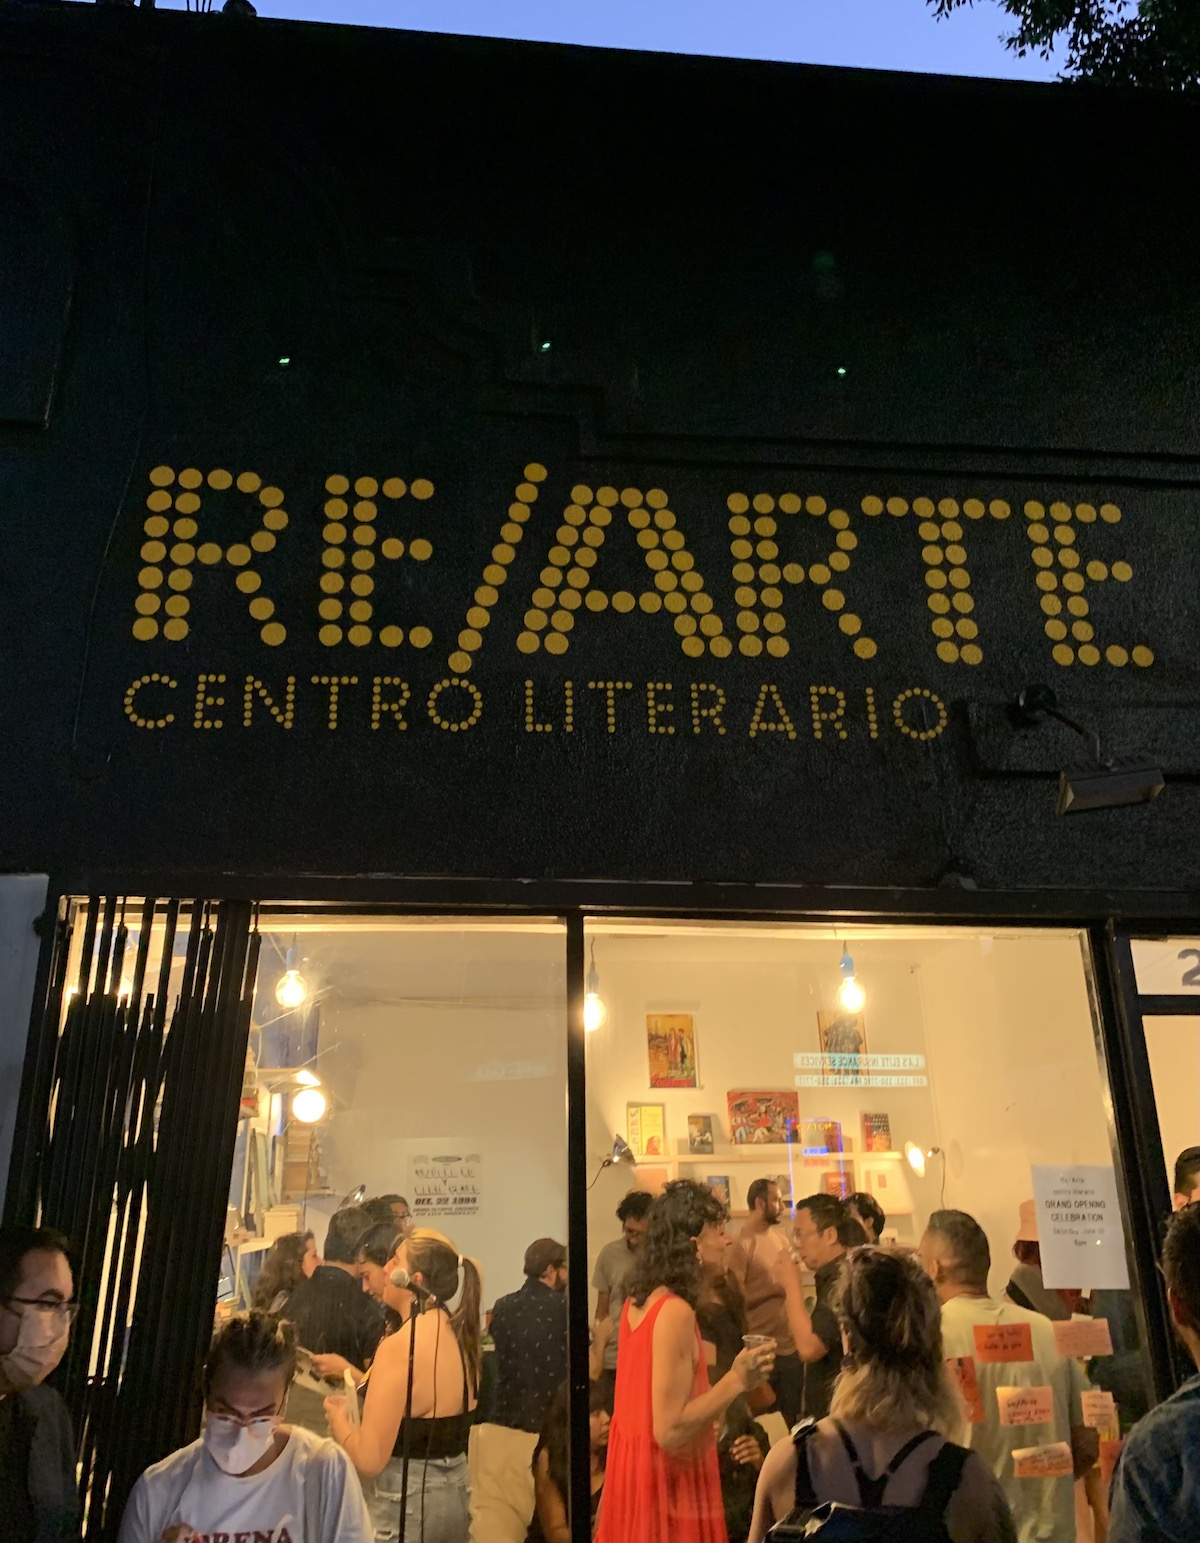 Sign reads RE/ARTE, Centro Literario outside a storefront, with a crowd enjoying themselves inside.